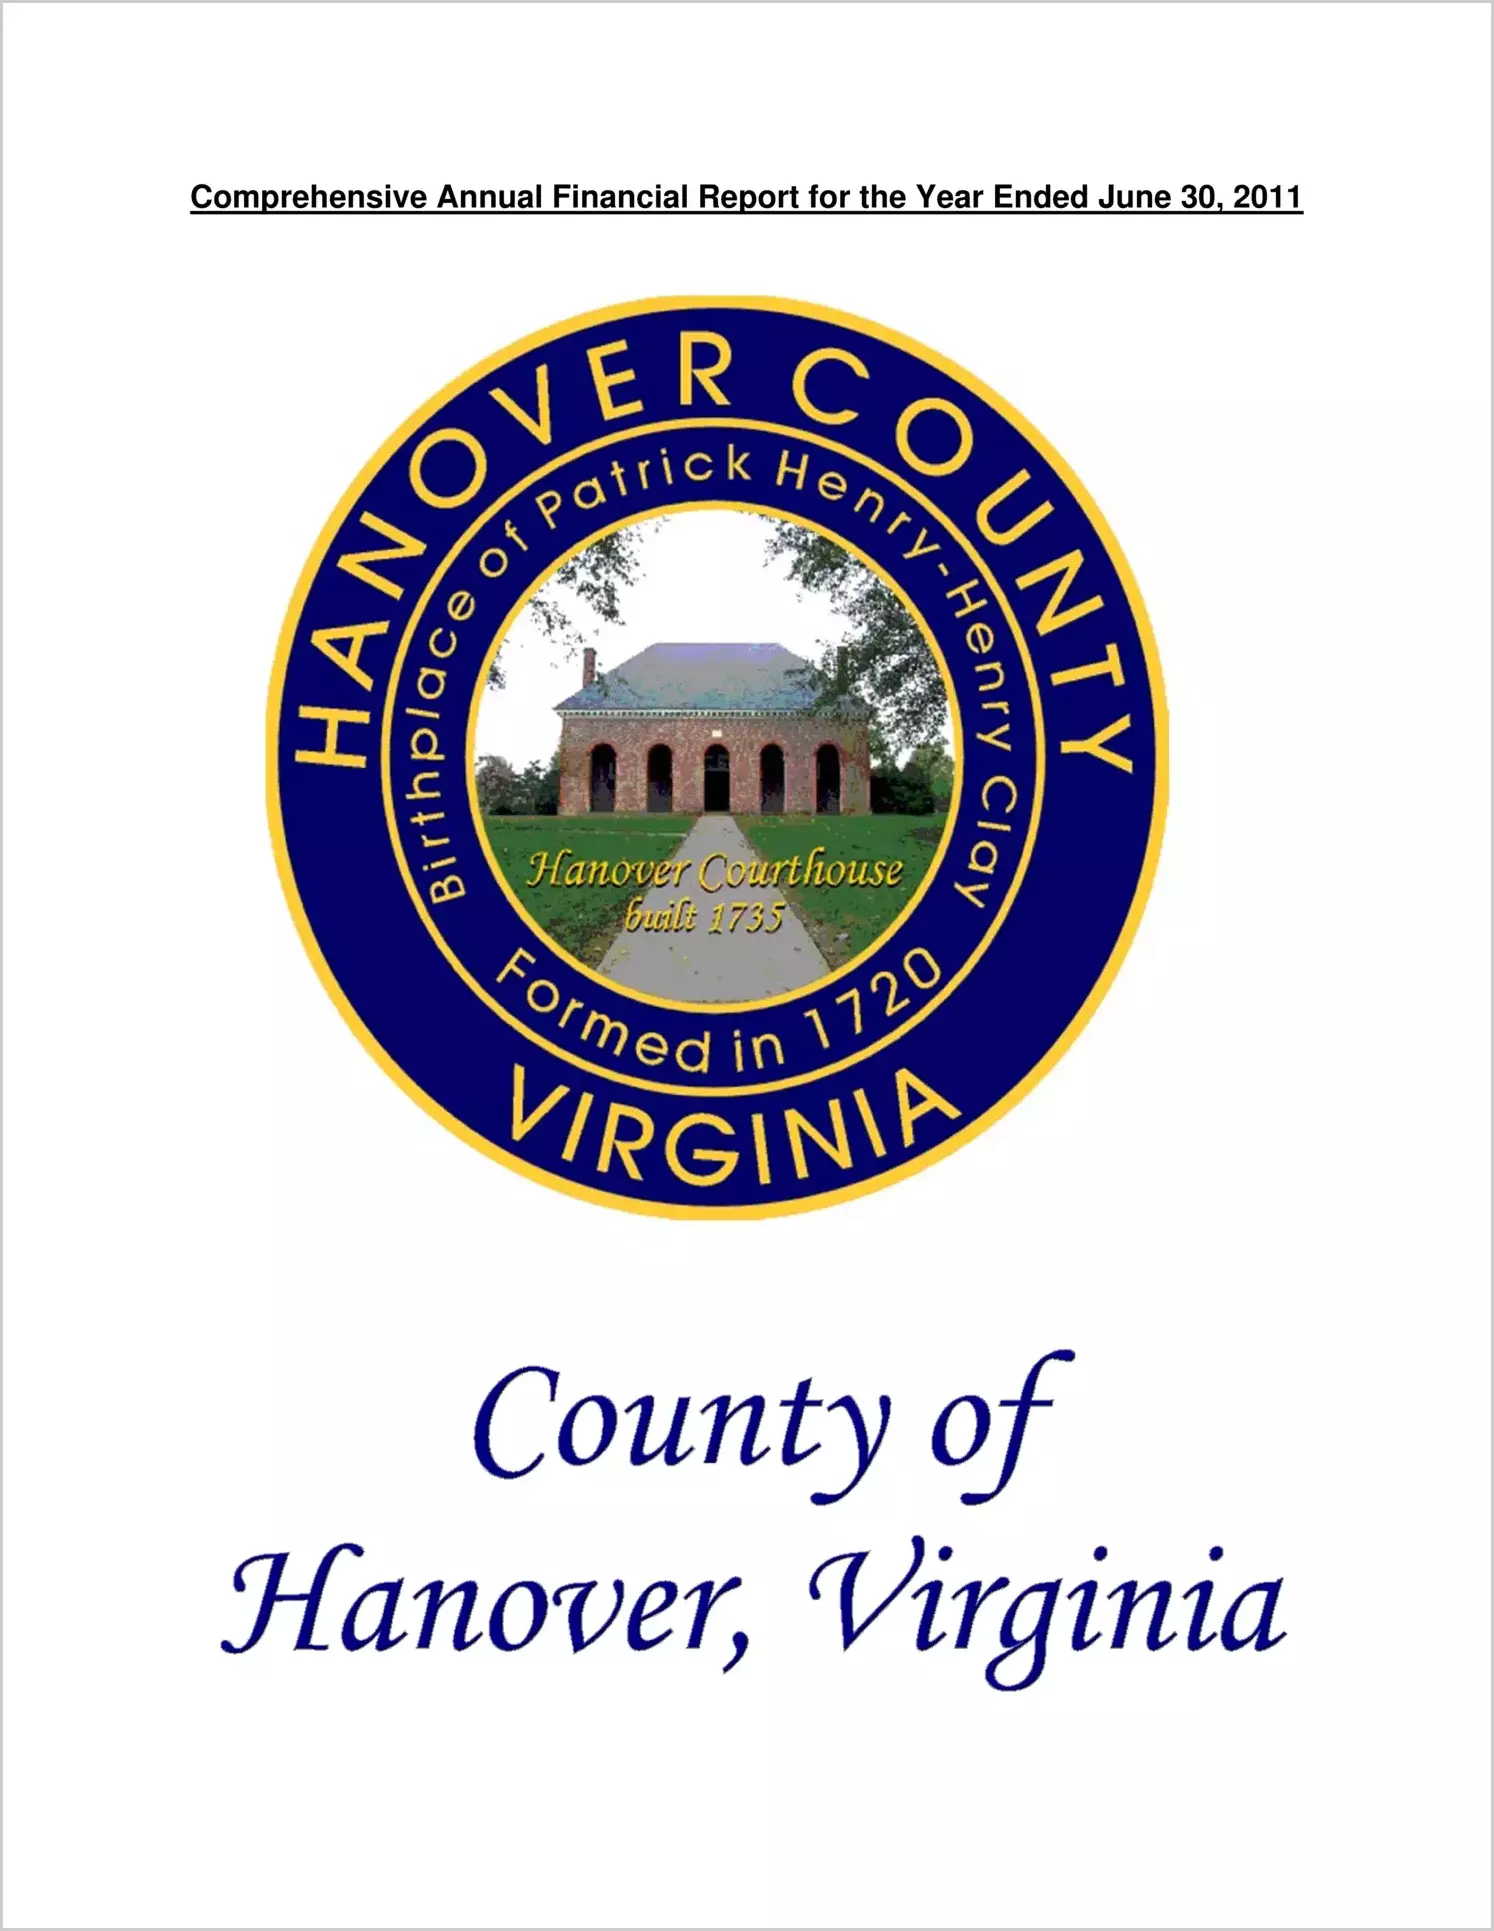 2011 Annual Financial Report for County of Hanover